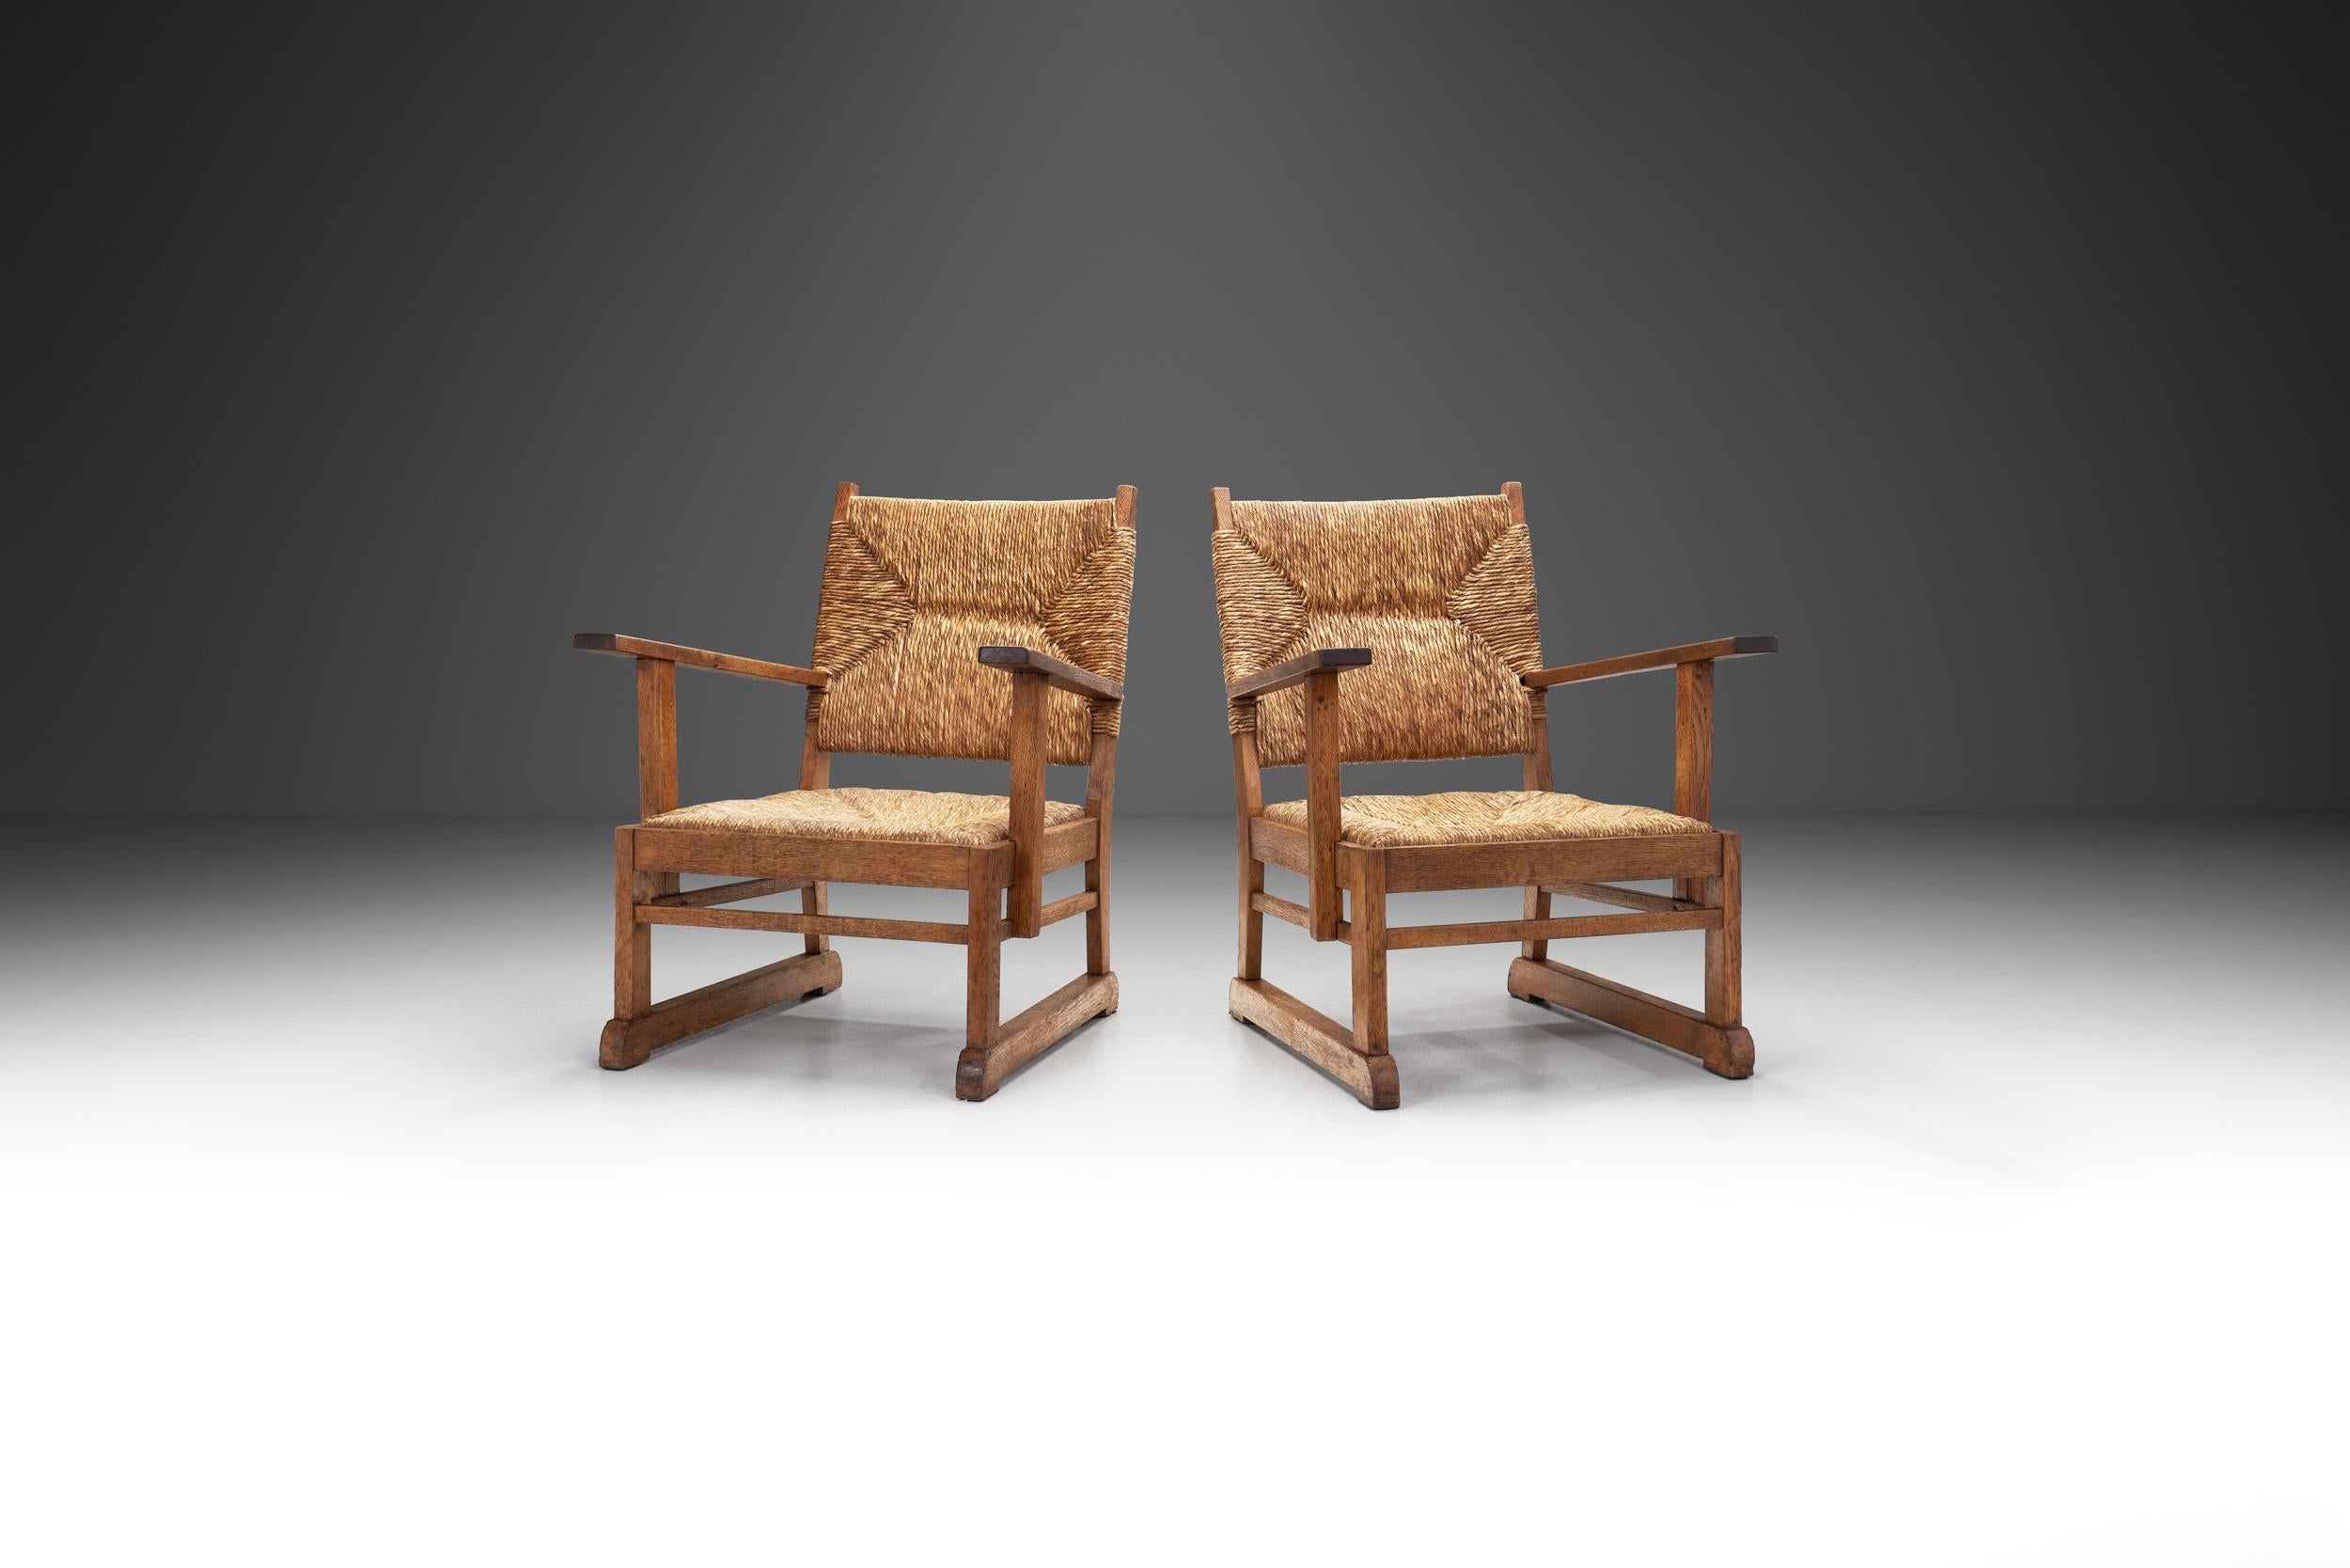 This pair of chairs carries with it the same beloved modernist characteristics applied to American, Scandinavian, and Italian mid-century design – simple, functional – and shows the more and more loved rustic side of the design era.

This pair of